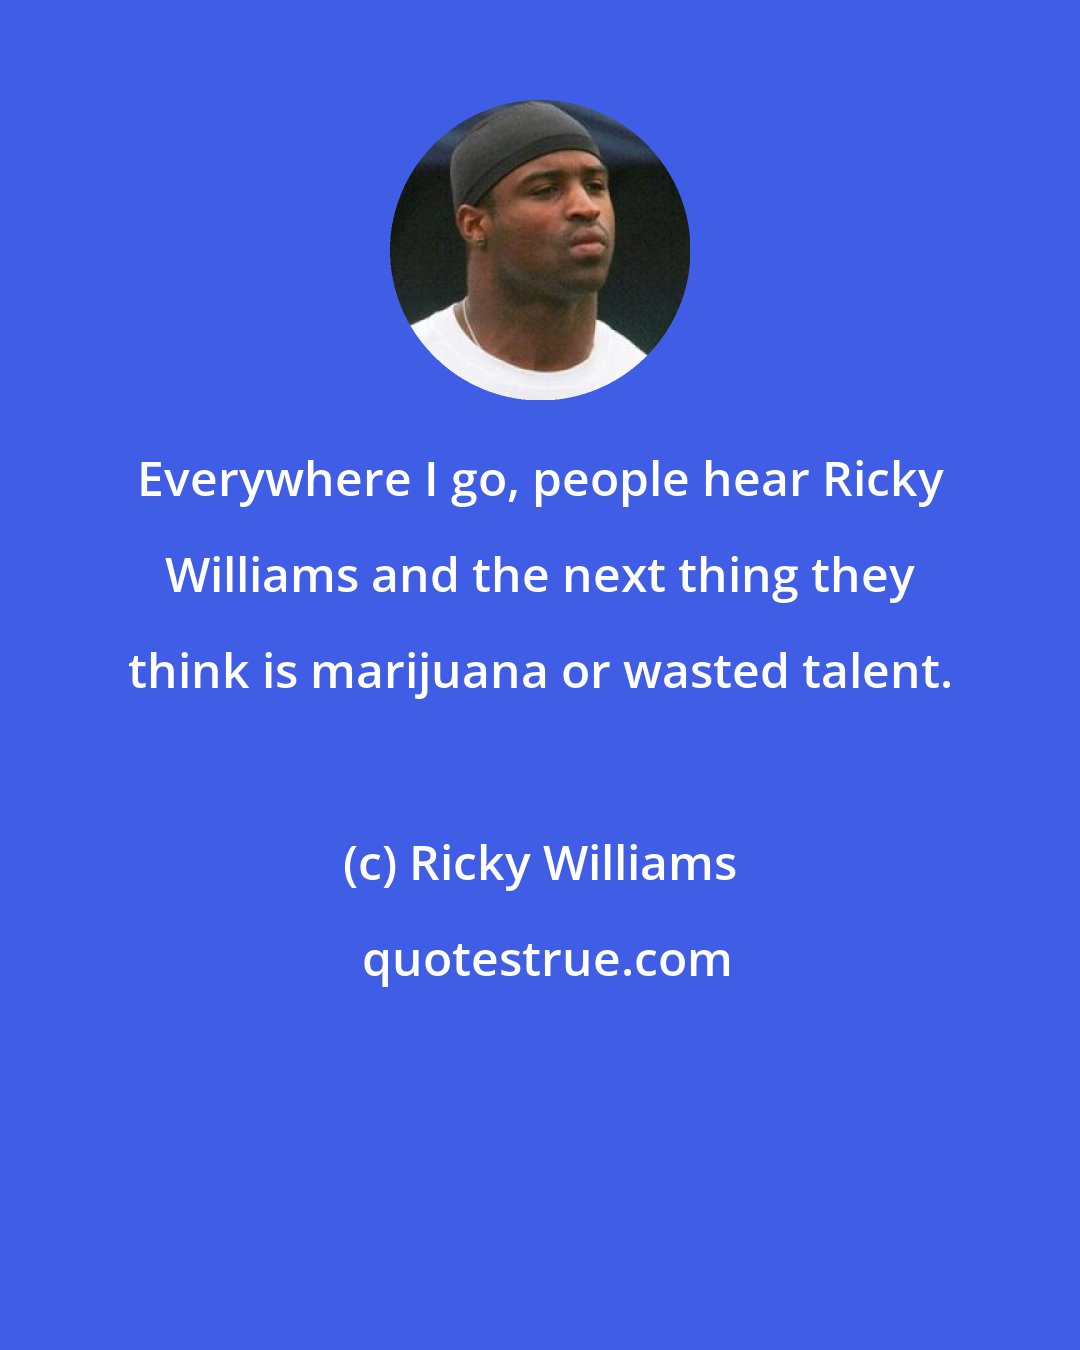 Ricky Williams: Everywhere I go, people hear Ricky Williams and the next thing they think is marijuana or wasted talent.